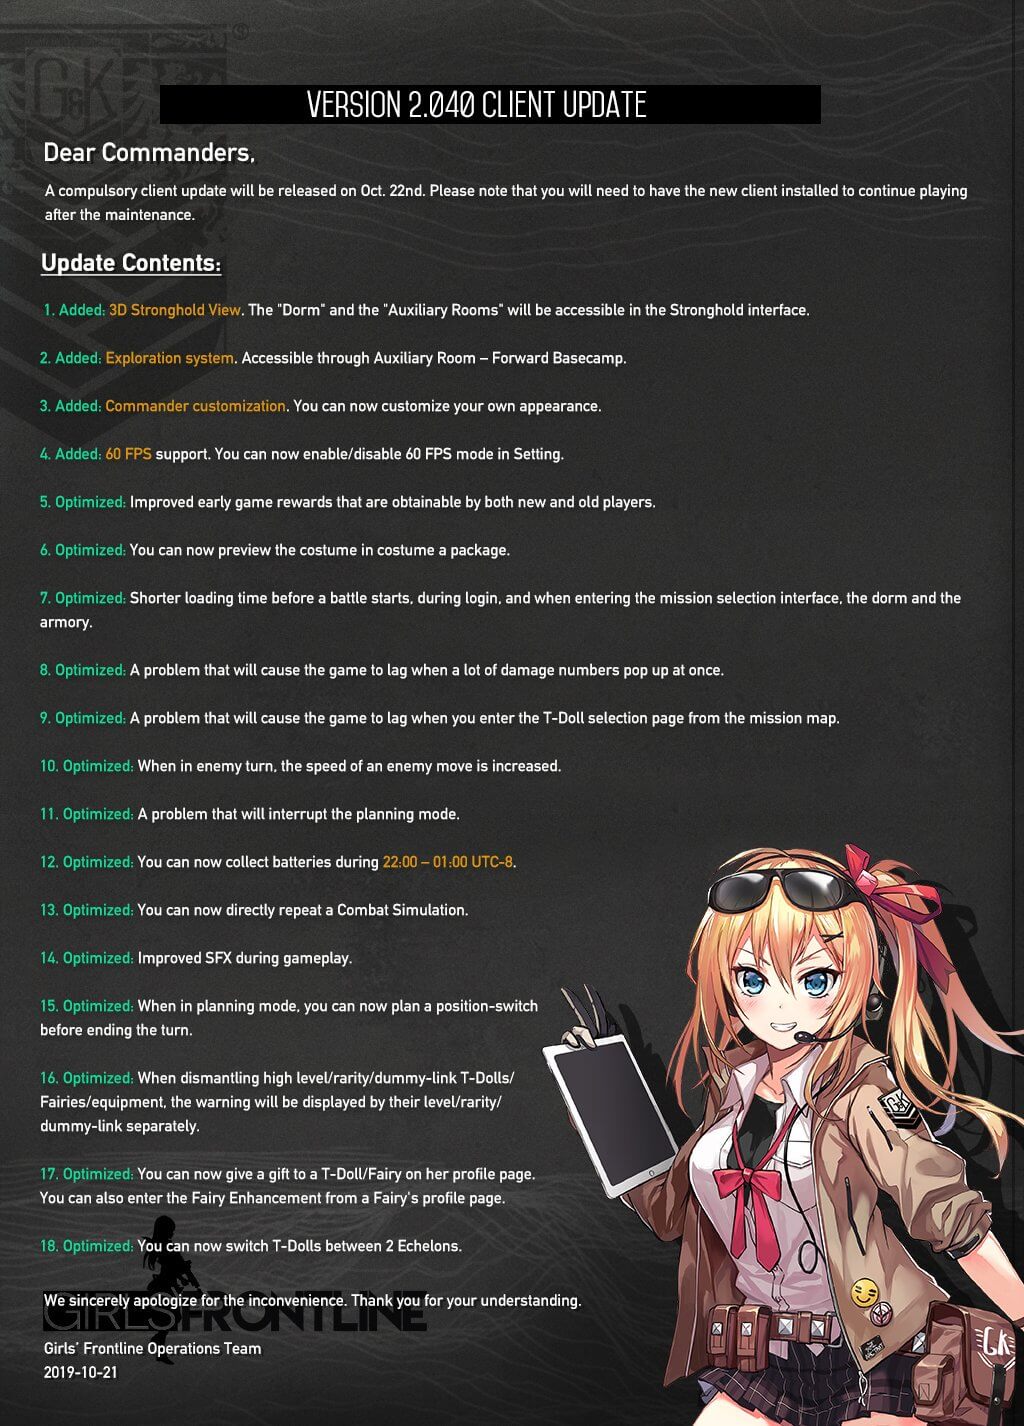 Official full update notes for GFL Client version 2.040